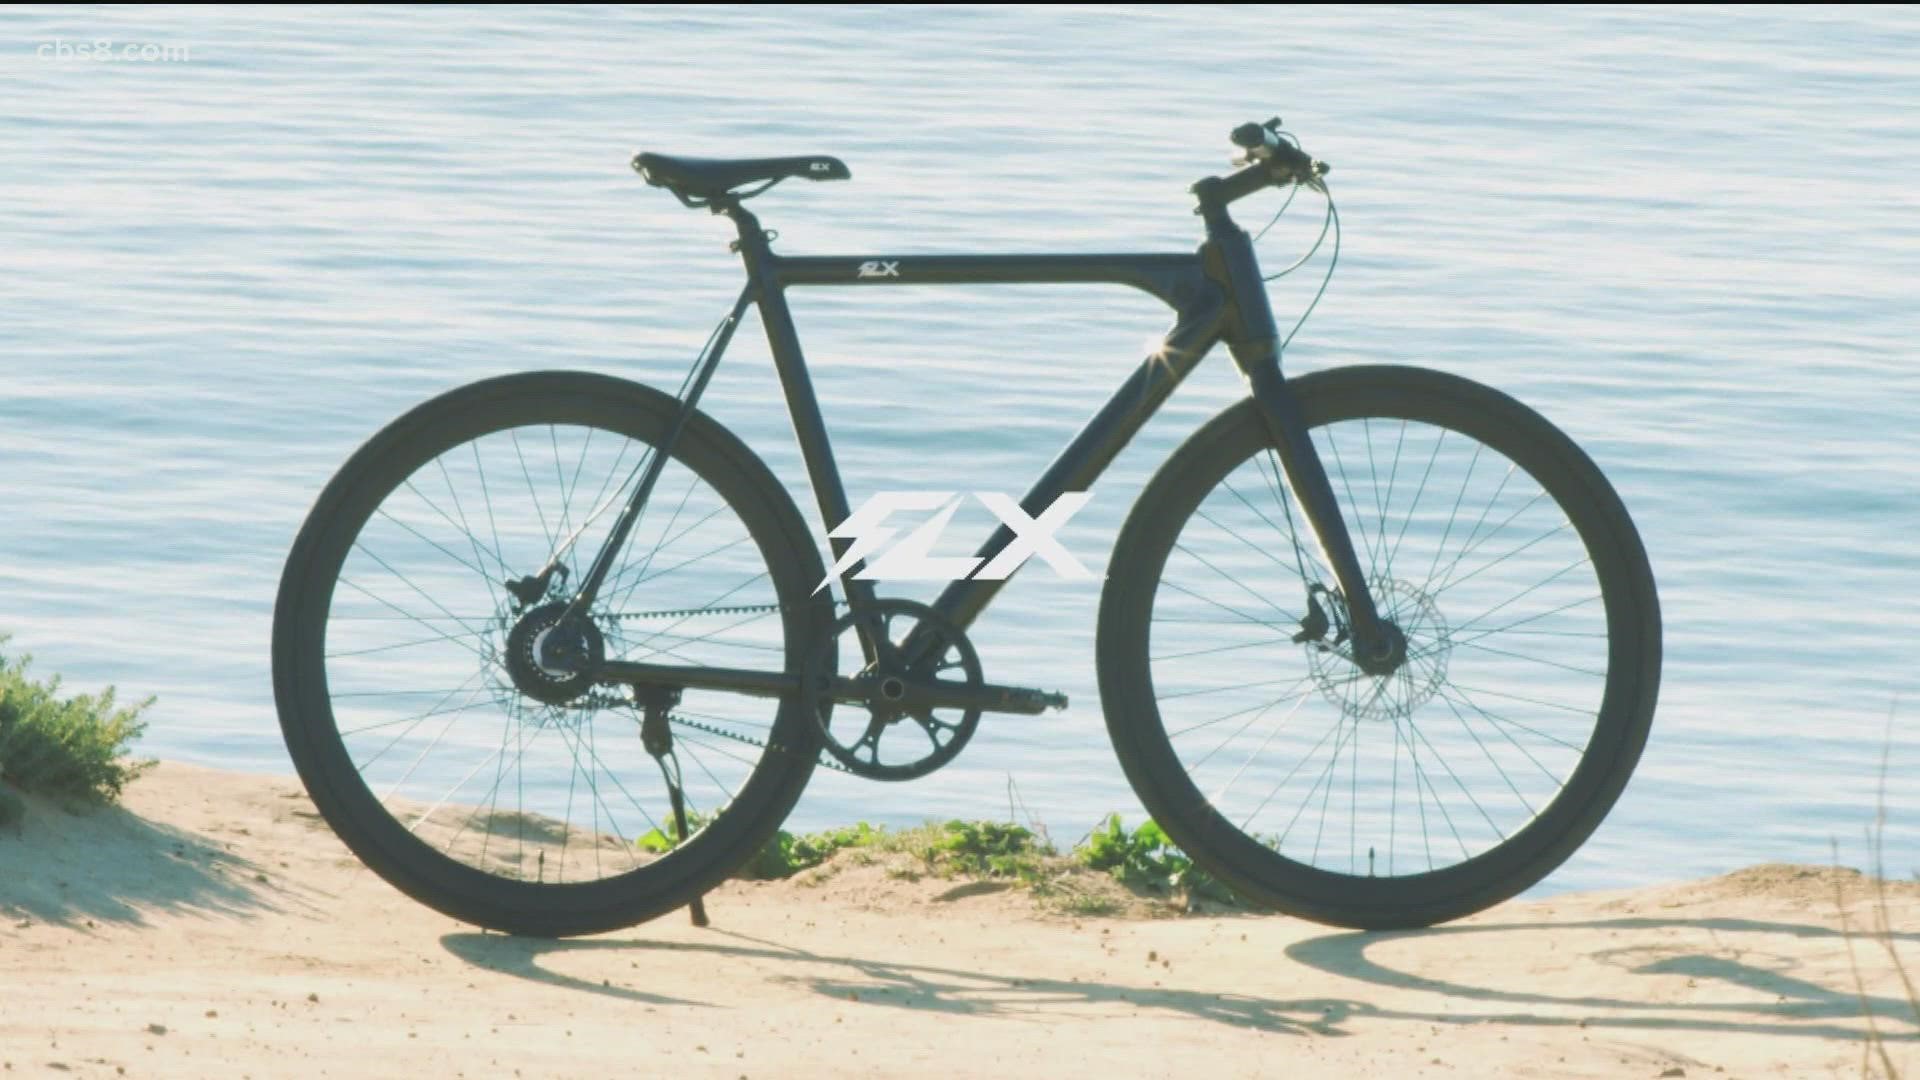 FLX Bike is a San Diego based business helping folks get around in a whole new way.